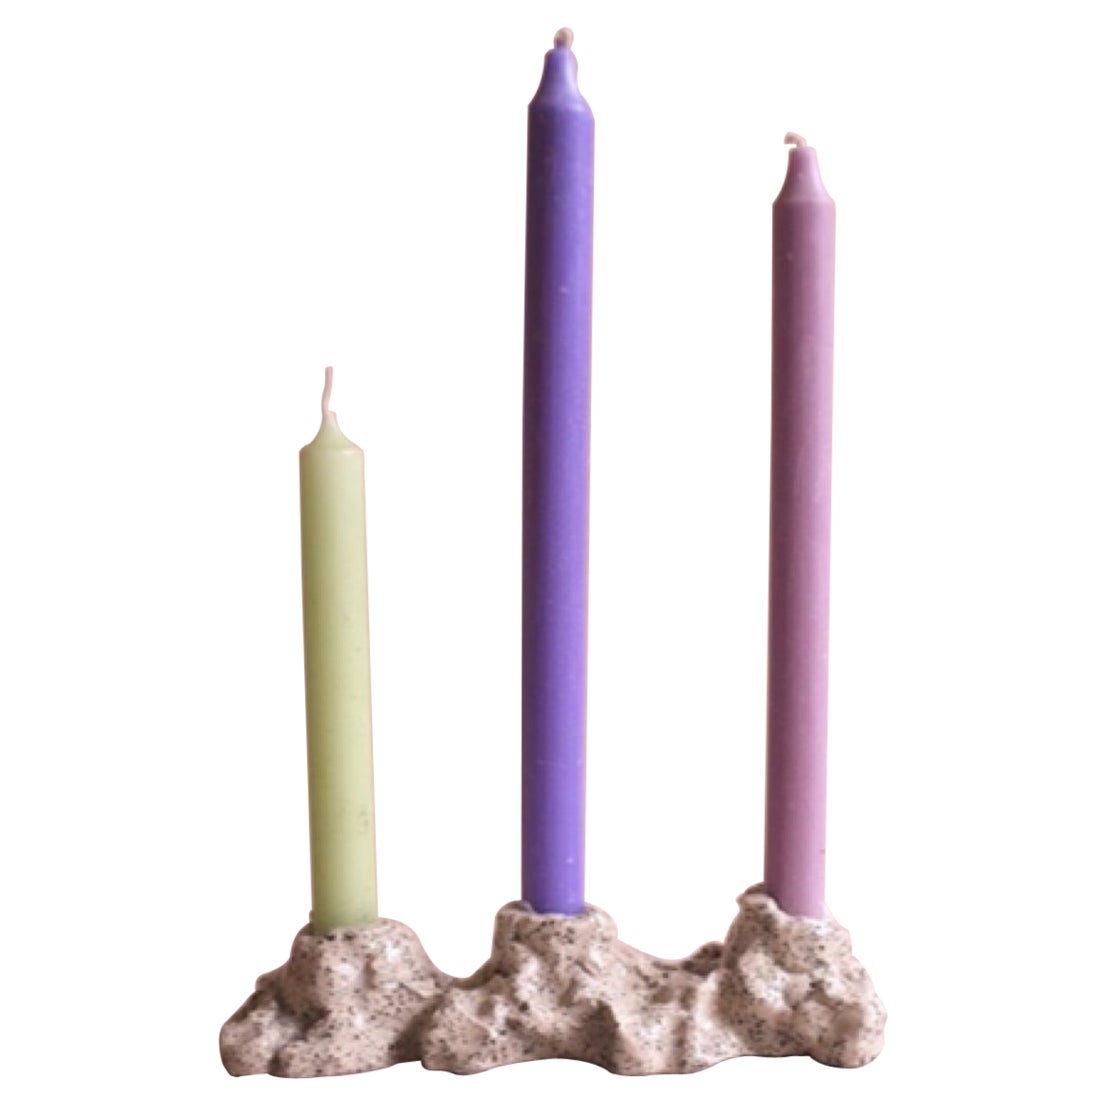 Triple Candle Rock in Stracciatella Clay with Sheer Glaze For Sale